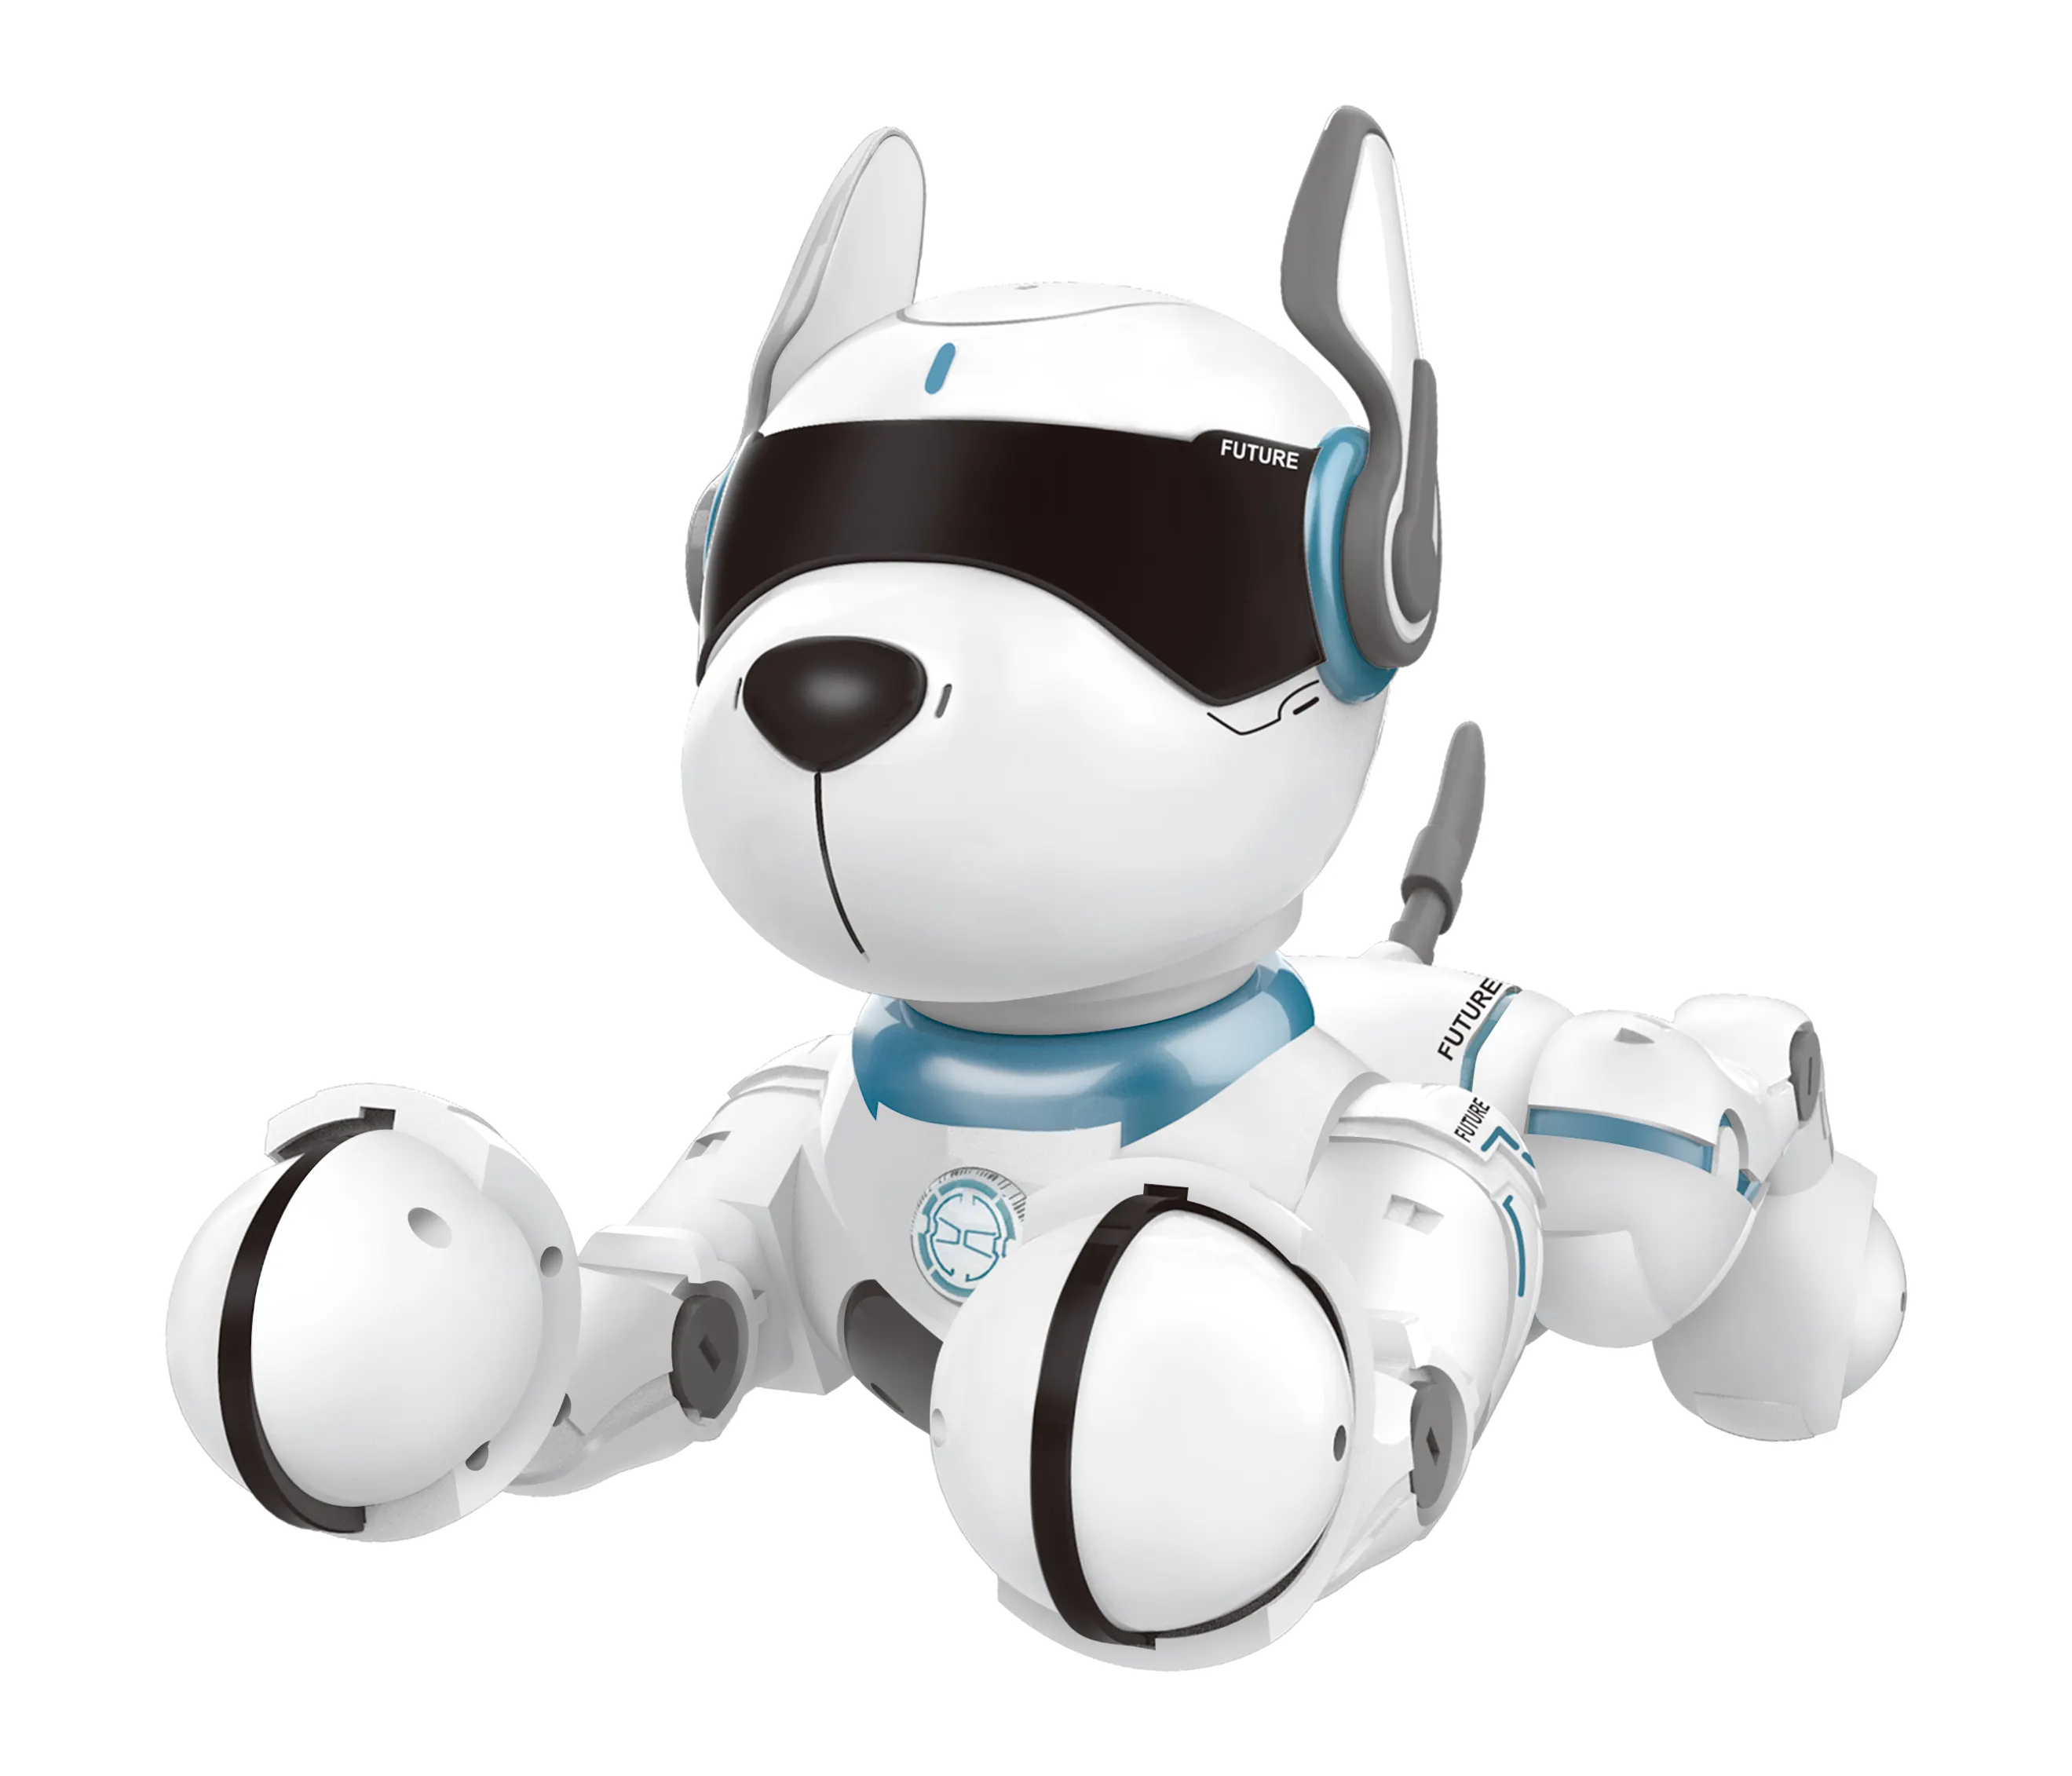 Kouyikou well design DIY remote control voice robot dog with music sounds stunt intelligent smart button robot dog for kid toy